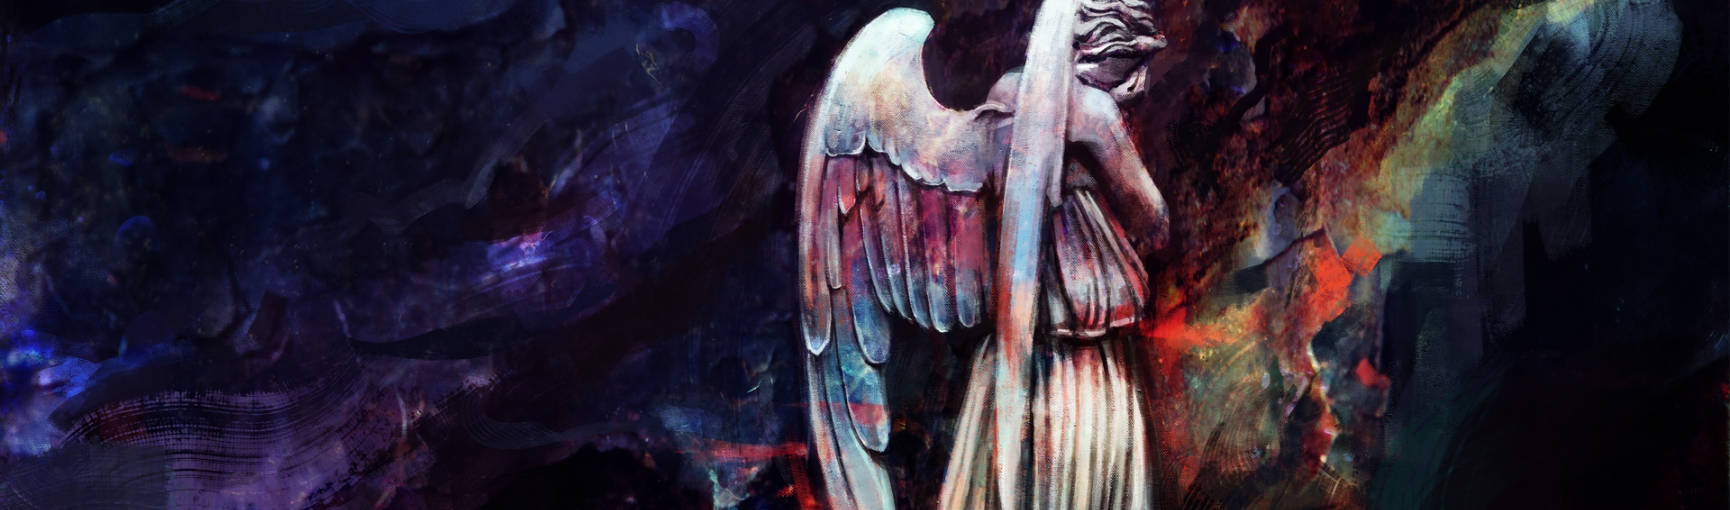 Doctor Who Weeping Angels Background